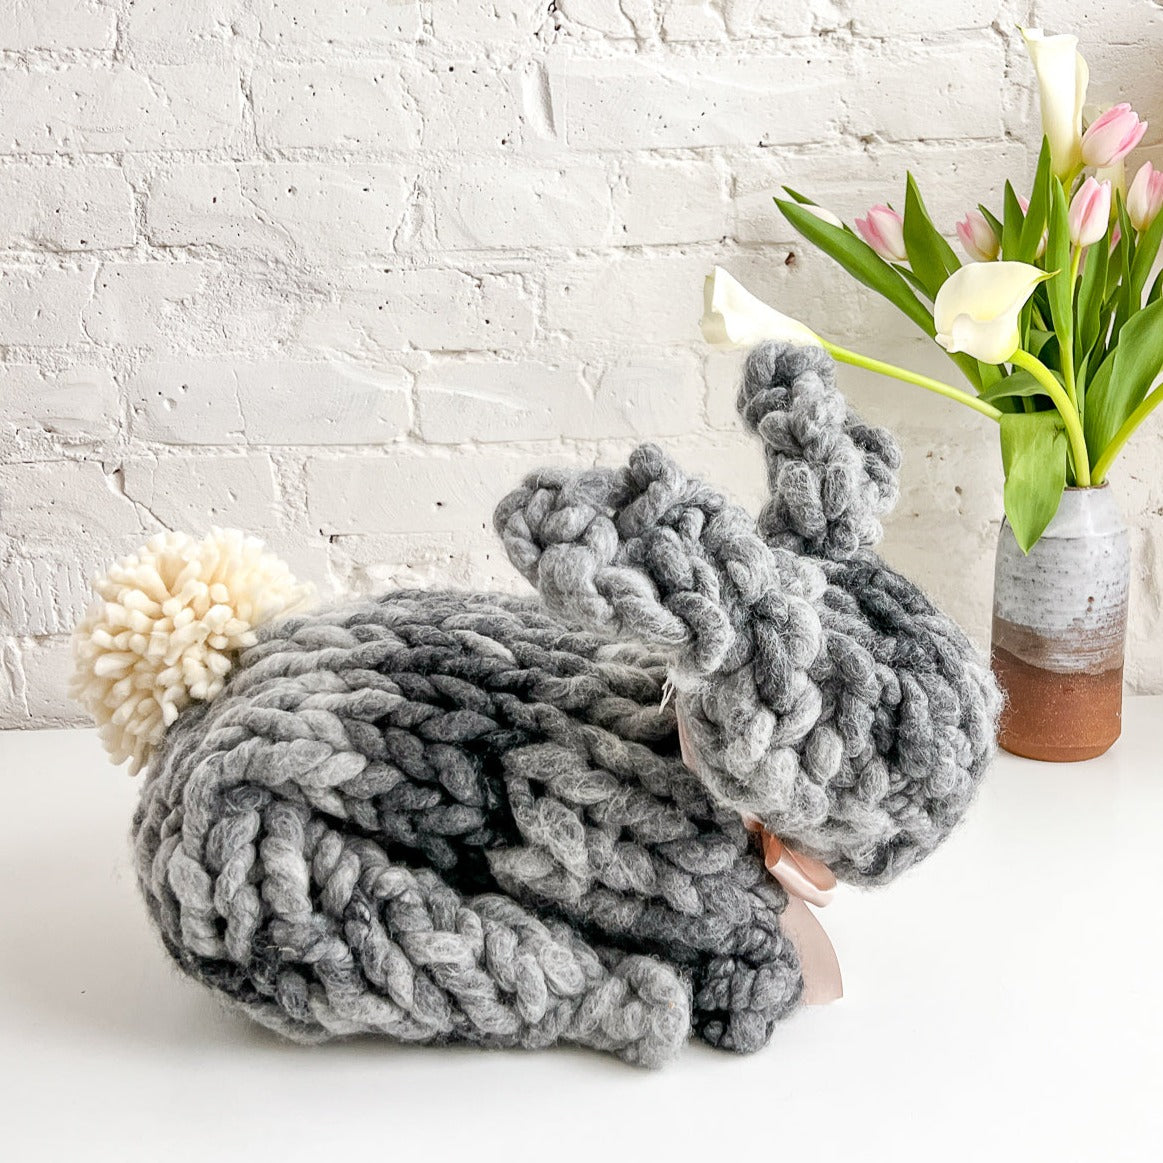 BIG Bunny (Knit with Needles) Pattern and VIDEO